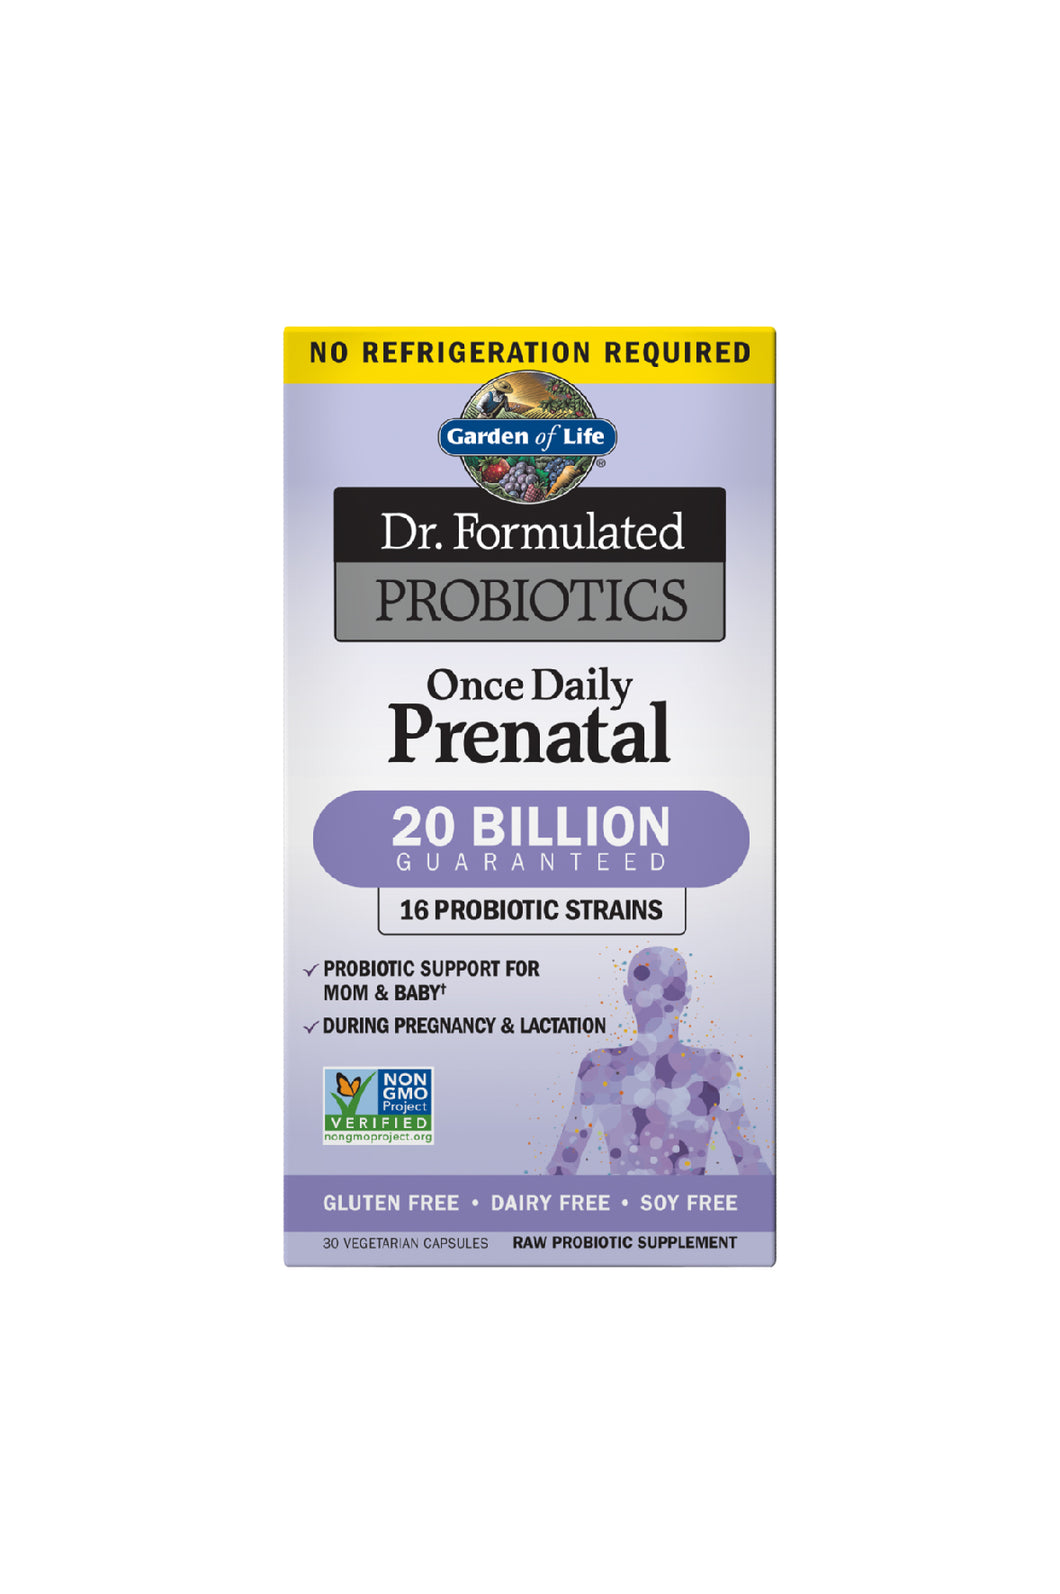 Once Daily Prenatal